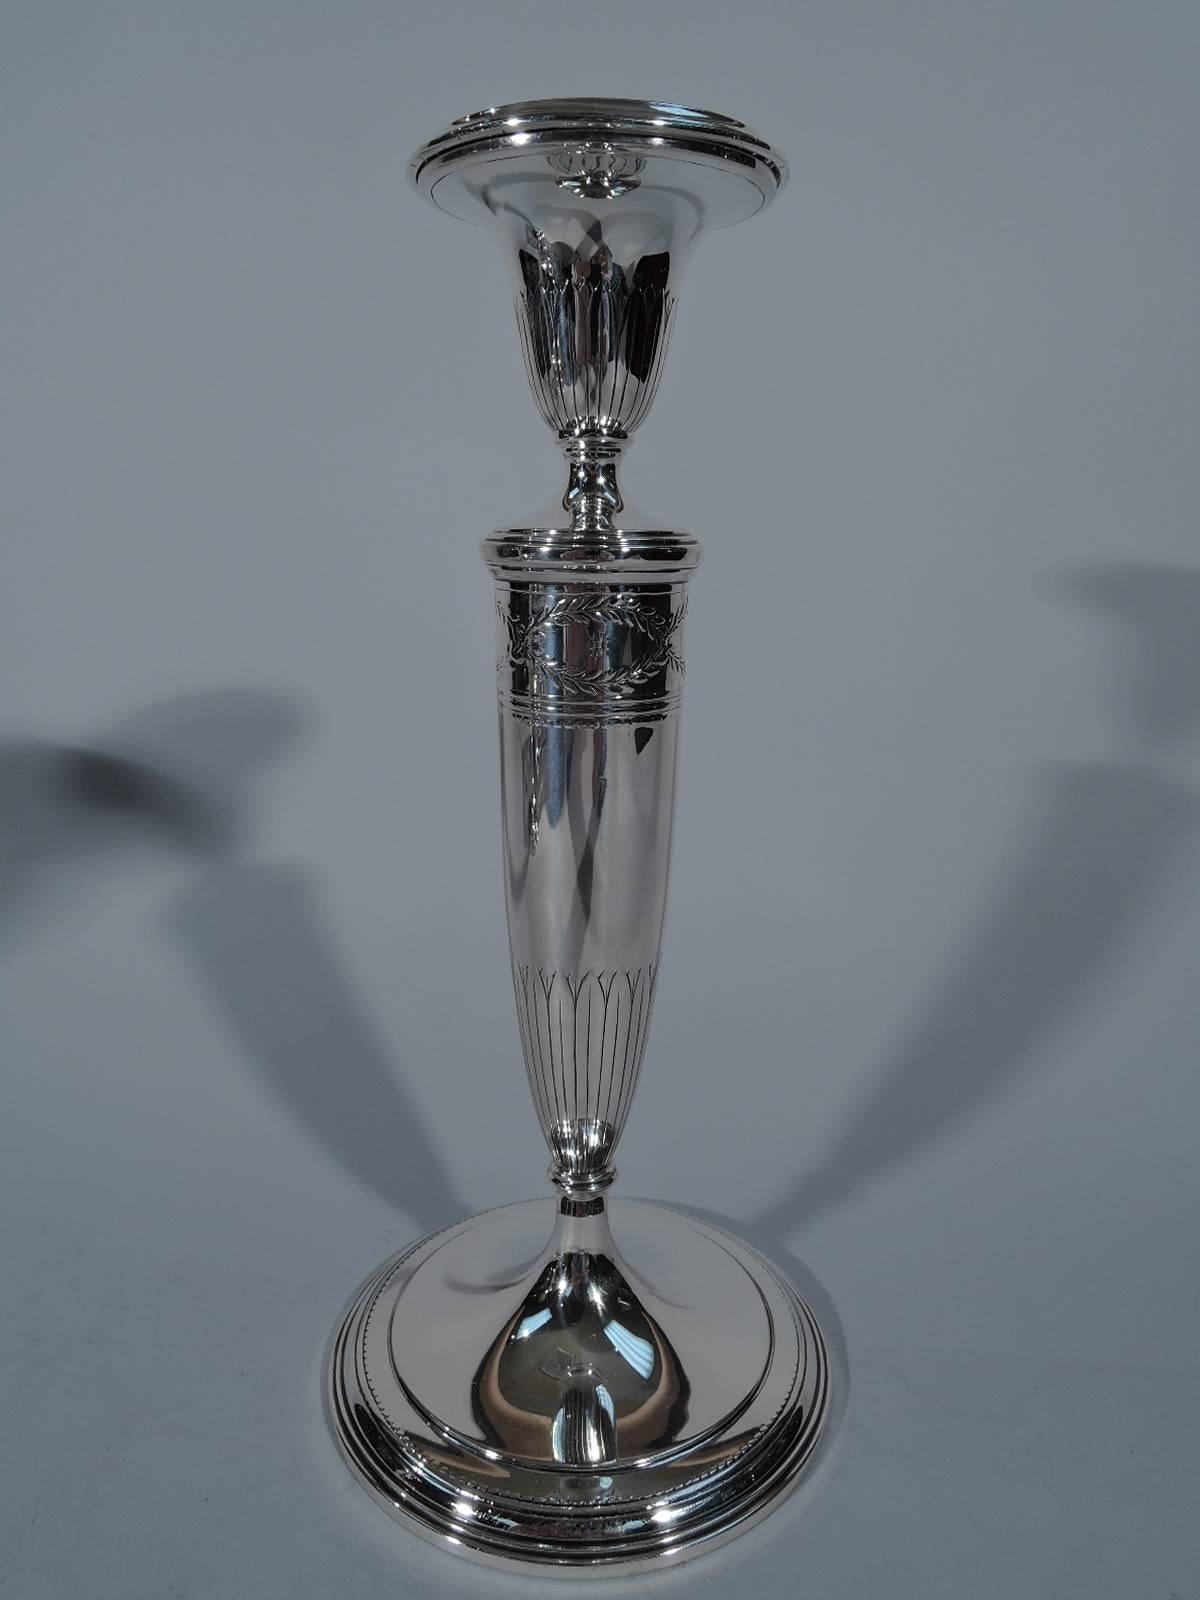 Pair of sterling silver candlesticks in Winthrop pattern. Made by Tiffany & Co. in New York, circa 1922. Each: Tapering shaft on stepped foot. Conical socket with detachable bobeche. Chased and stylized foliage on shaft and socket bases. Traditional